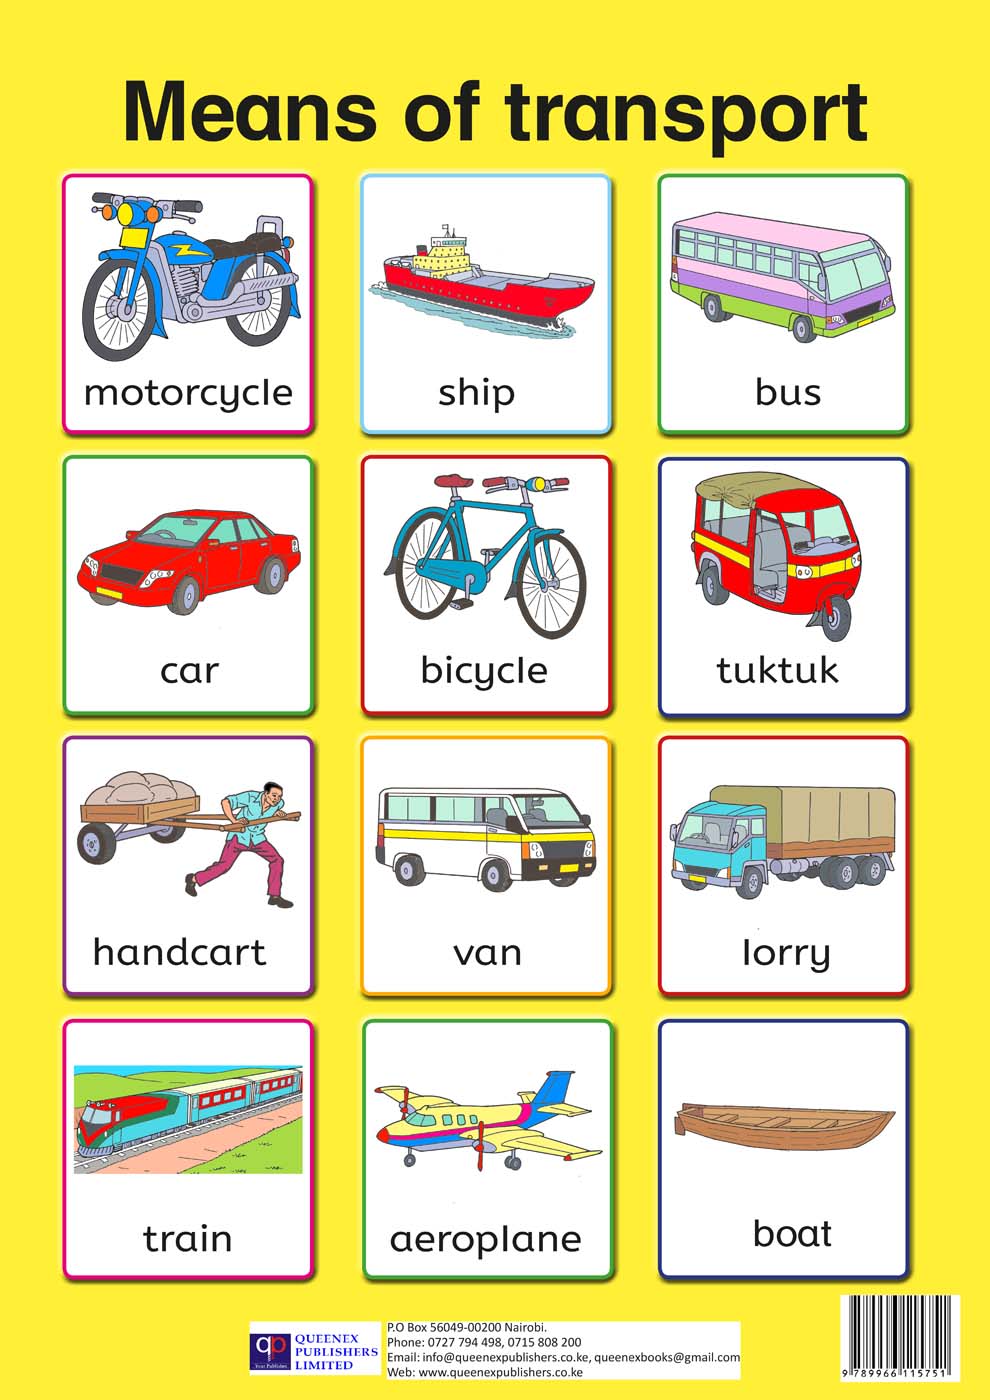 means of transport essay for class 3